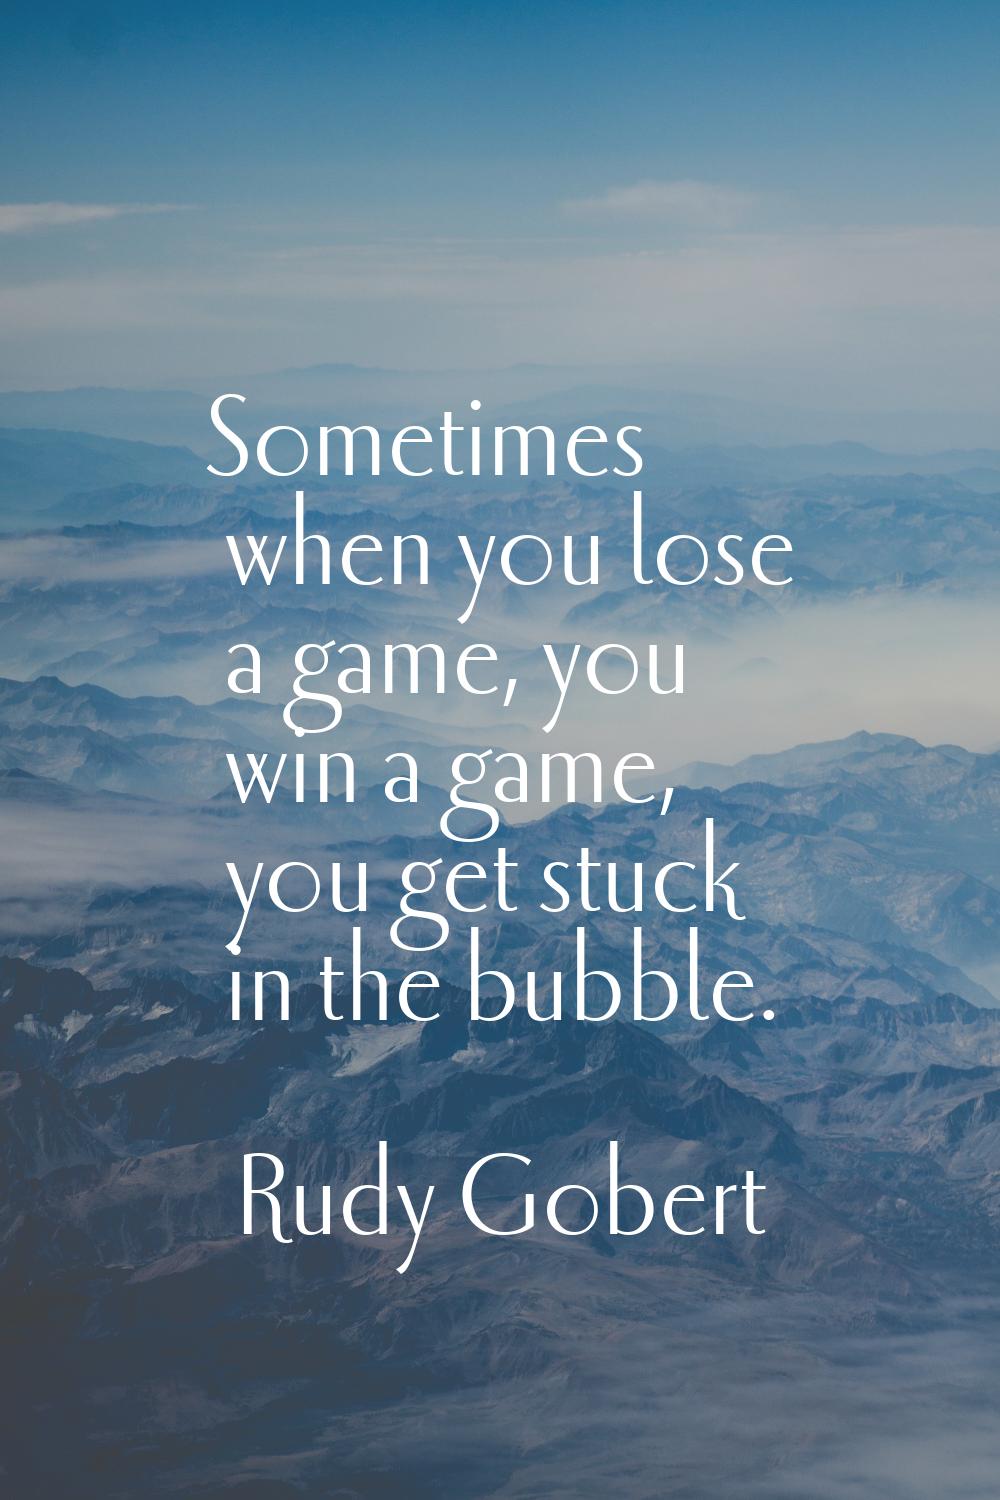 Sometimes when you lose a game, you win a game, you get stuck in the bubble.